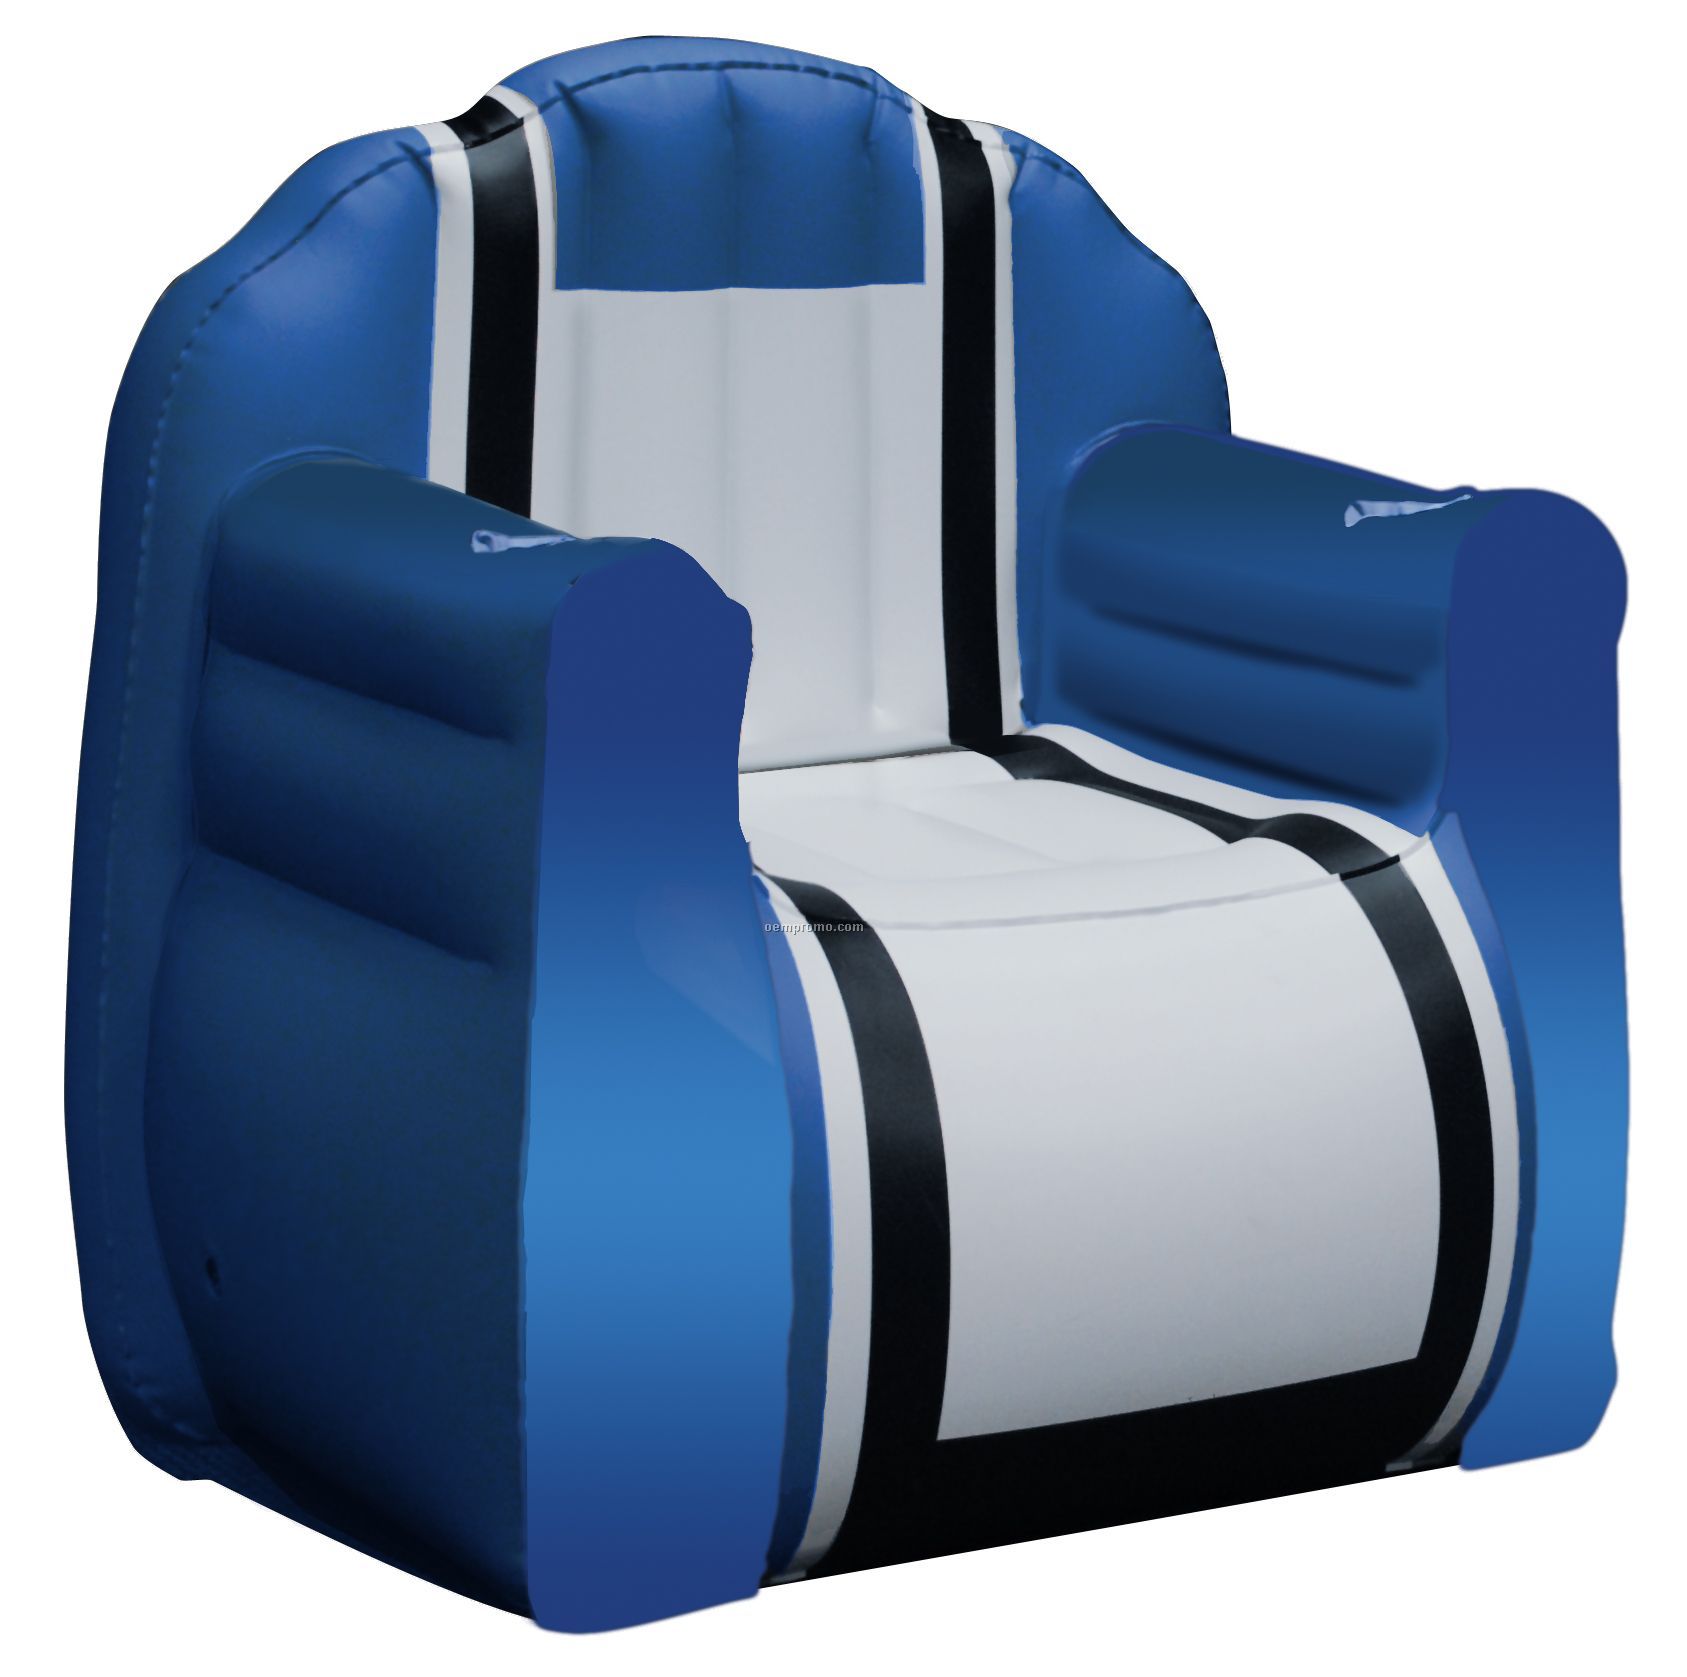 Inflate-a-seat "Chair": Blue/White/Black